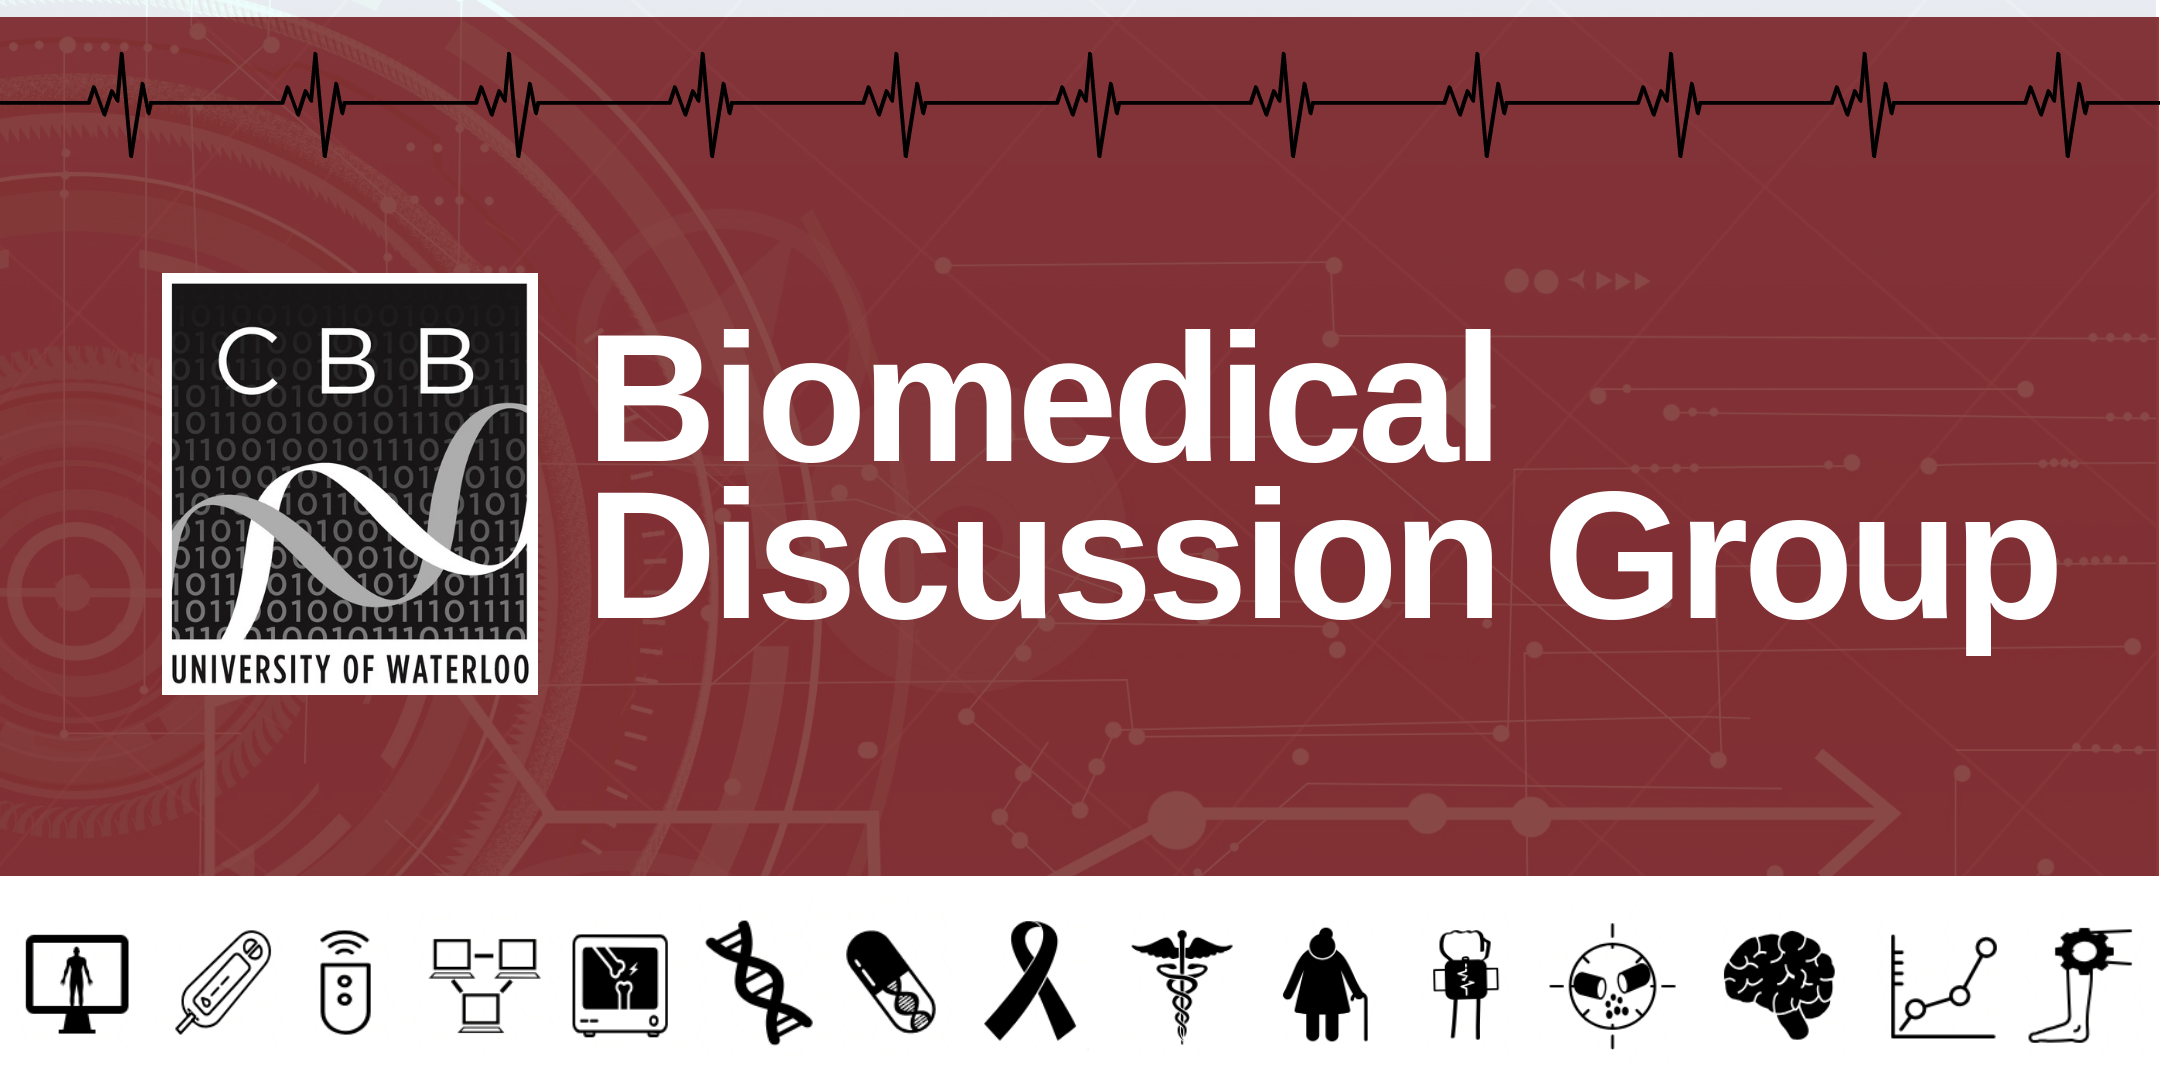 Biomedical Discussion Group